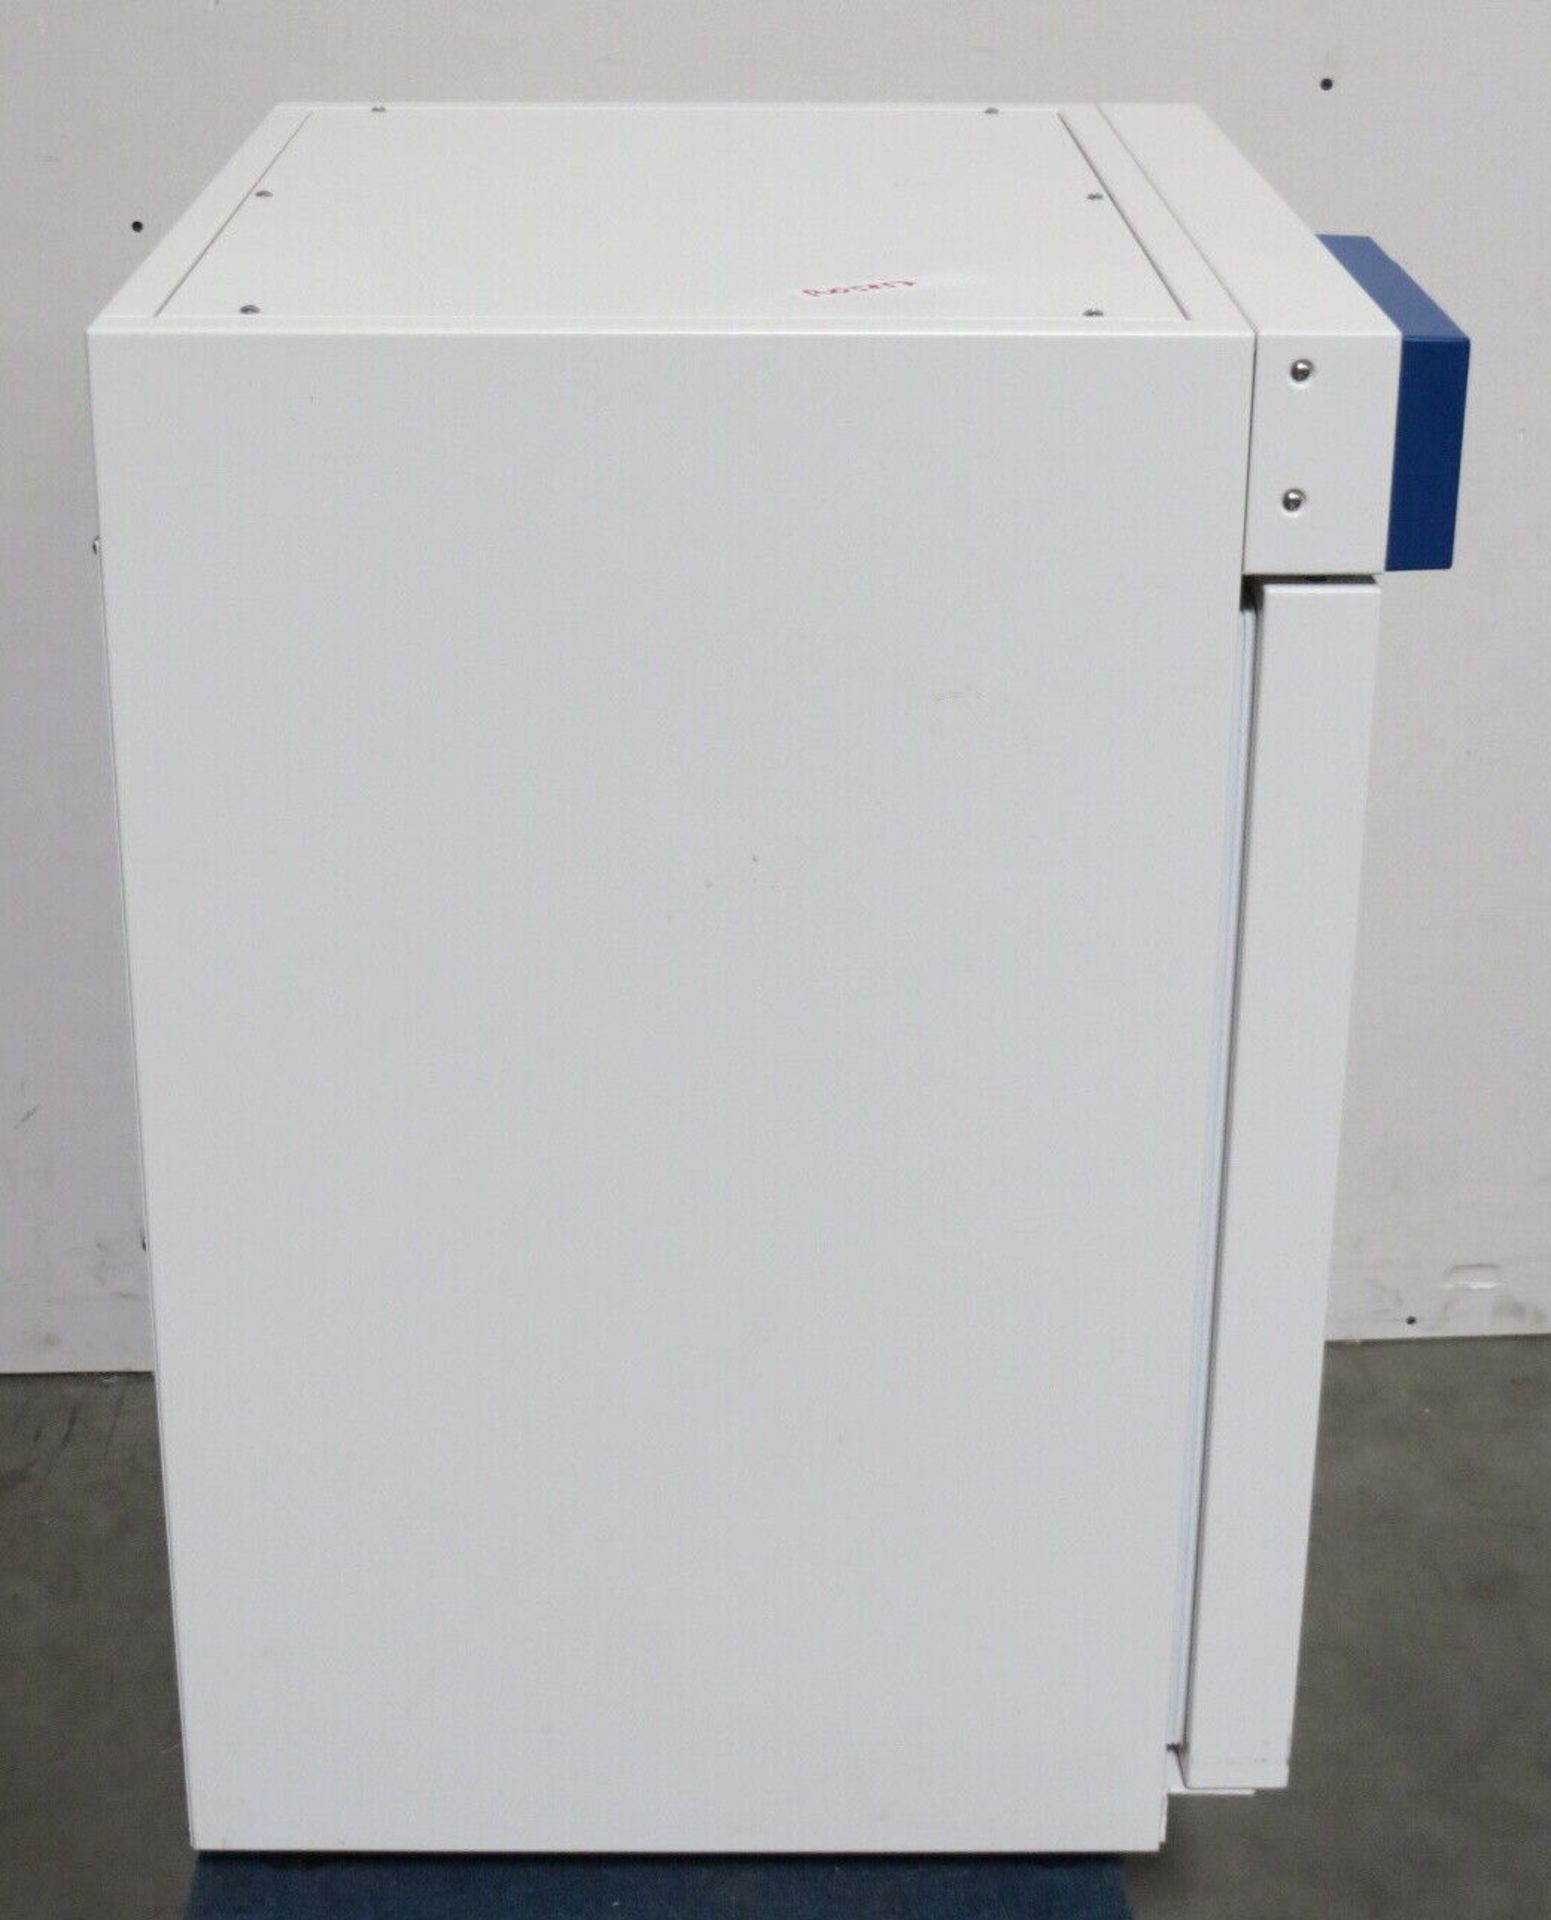 VWR 414005-132 Gravity Convection General Incubator - Image 6 of 9